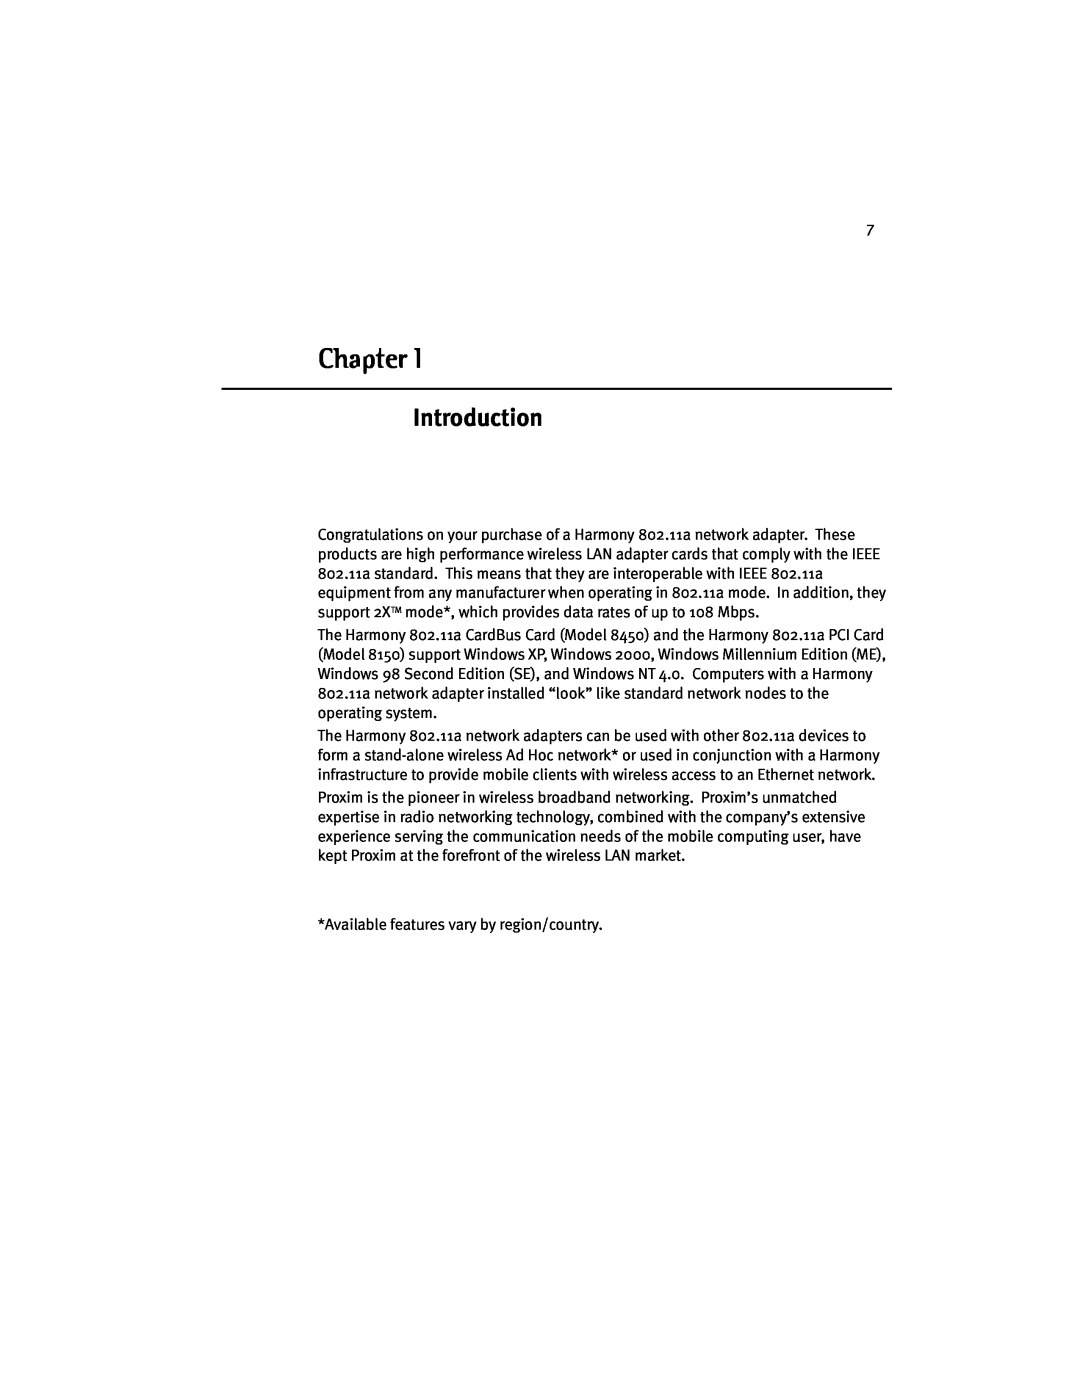 Harmony House 802.11a manual Chapter, Introduction 